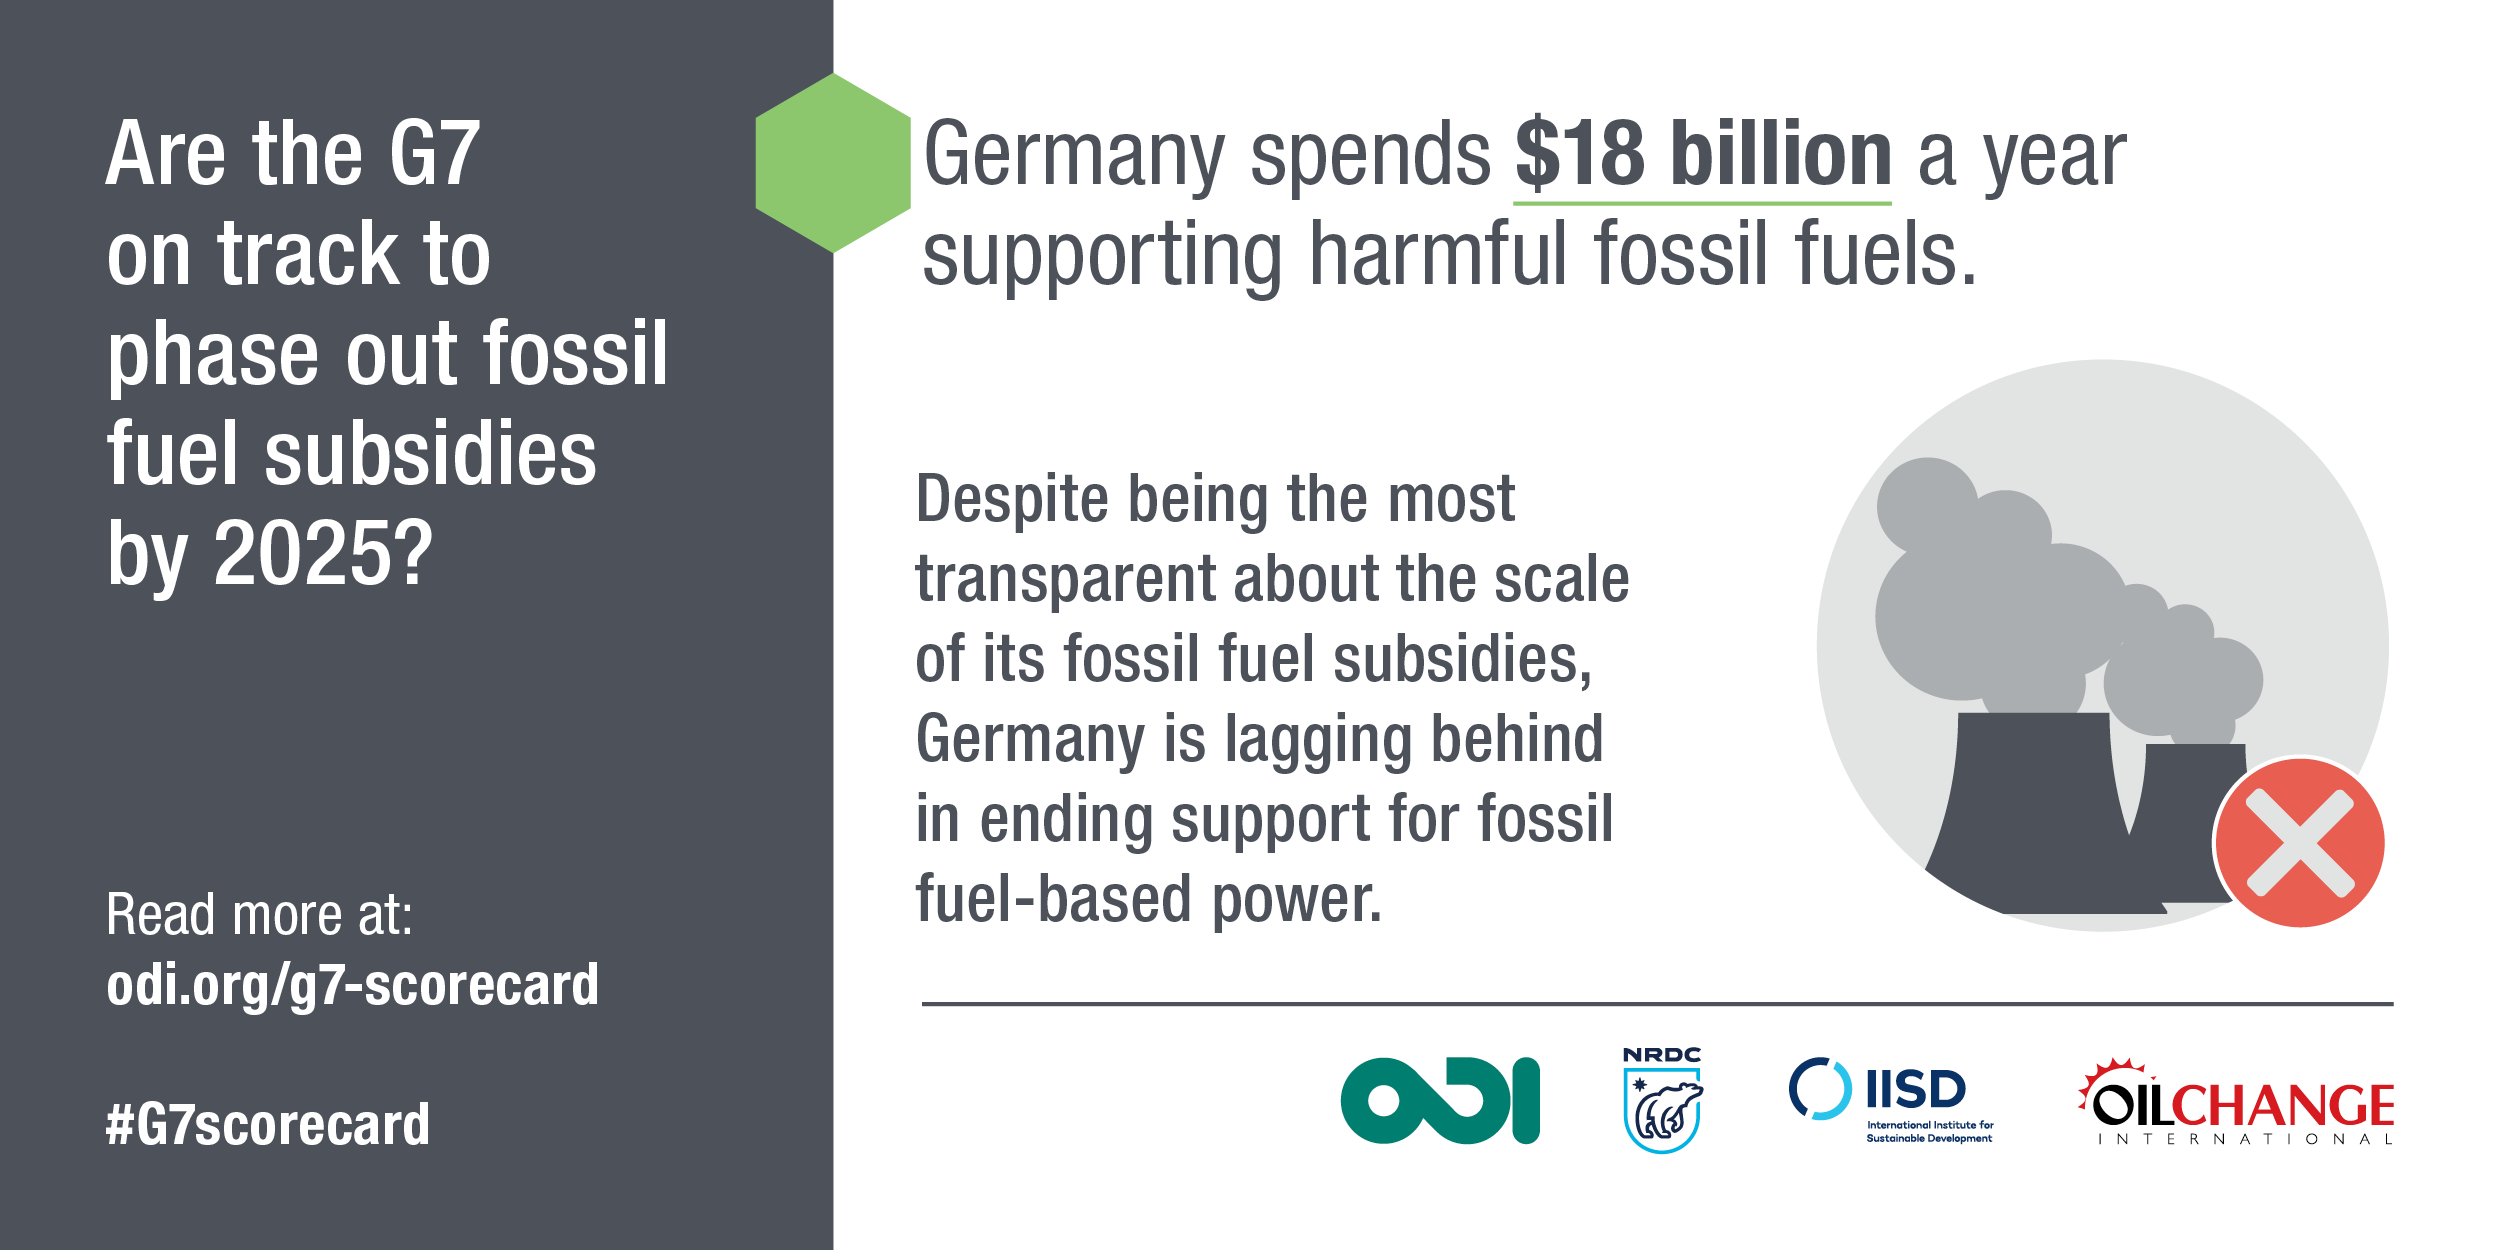 Germany spends $18 billion a year supporting harmful fossil fuels. Image: ODI